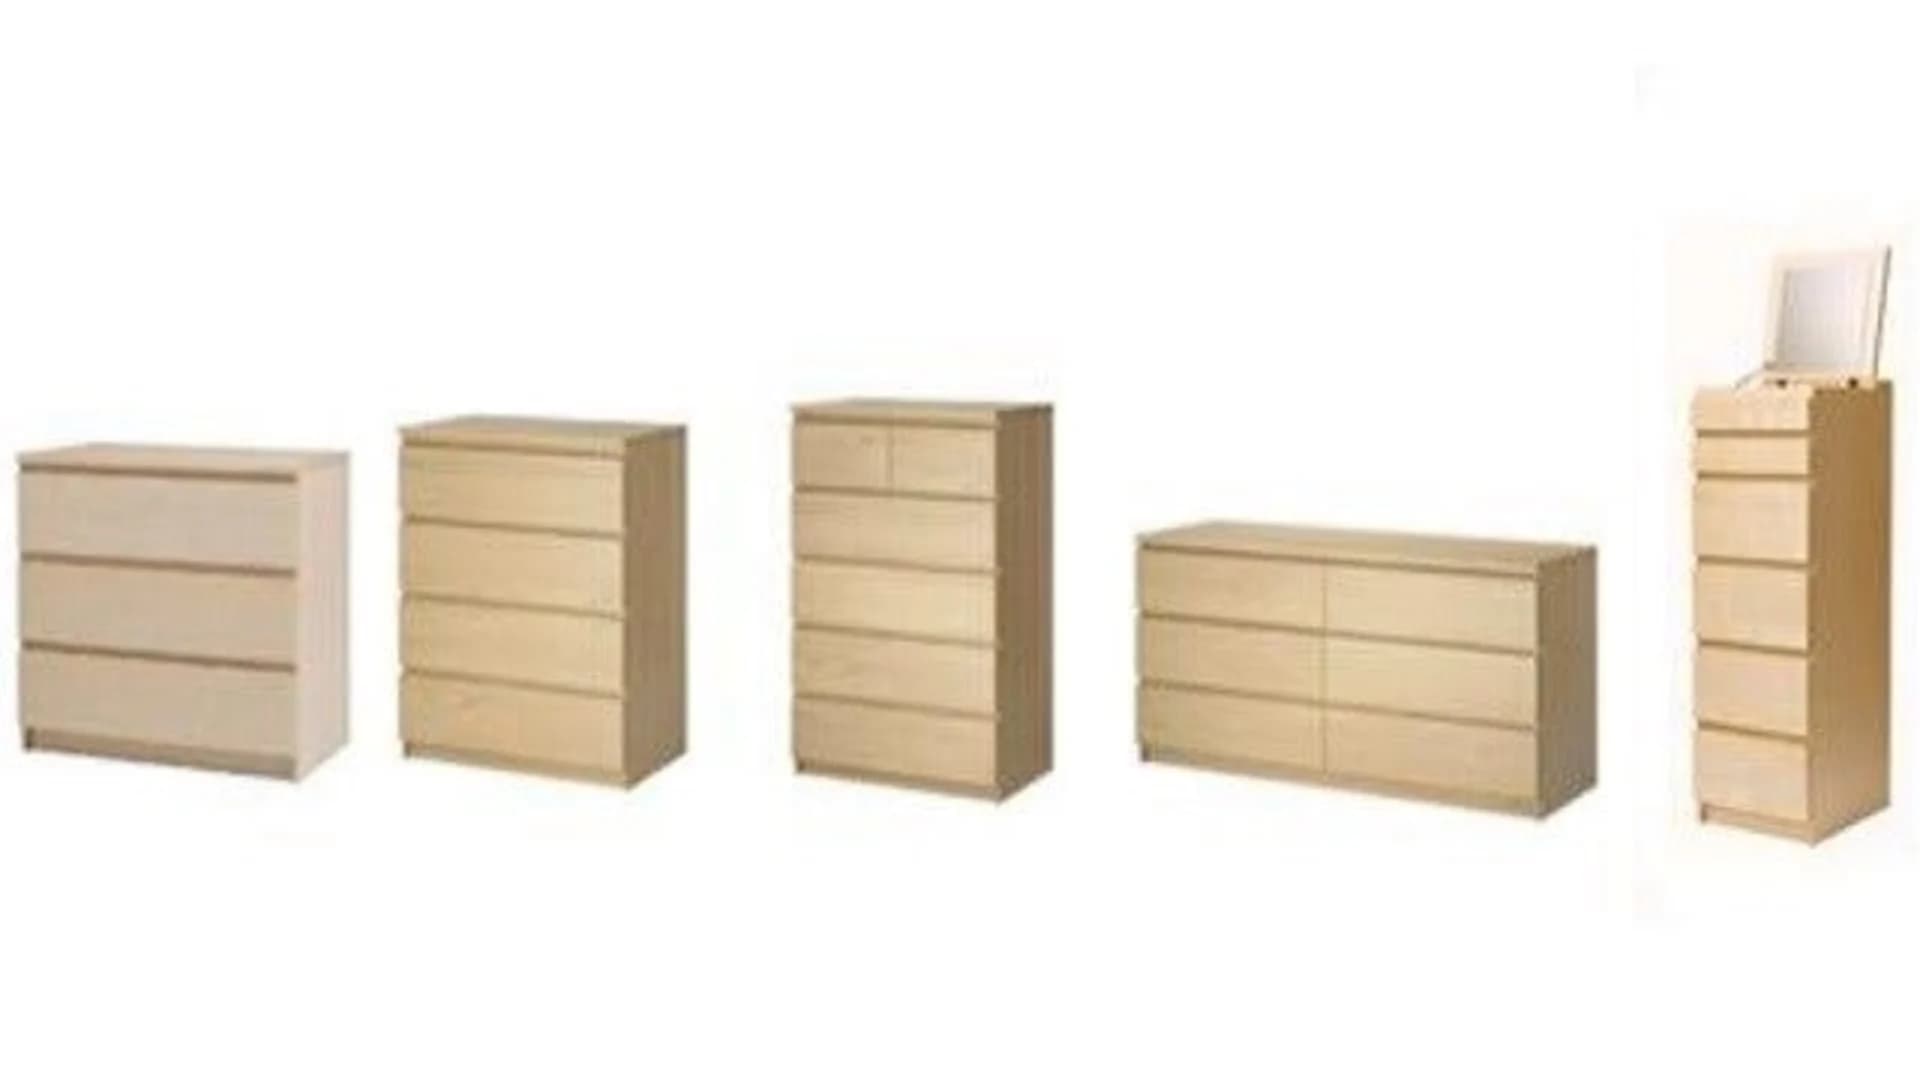 Ikea again announces dresser recall after death of 8th child